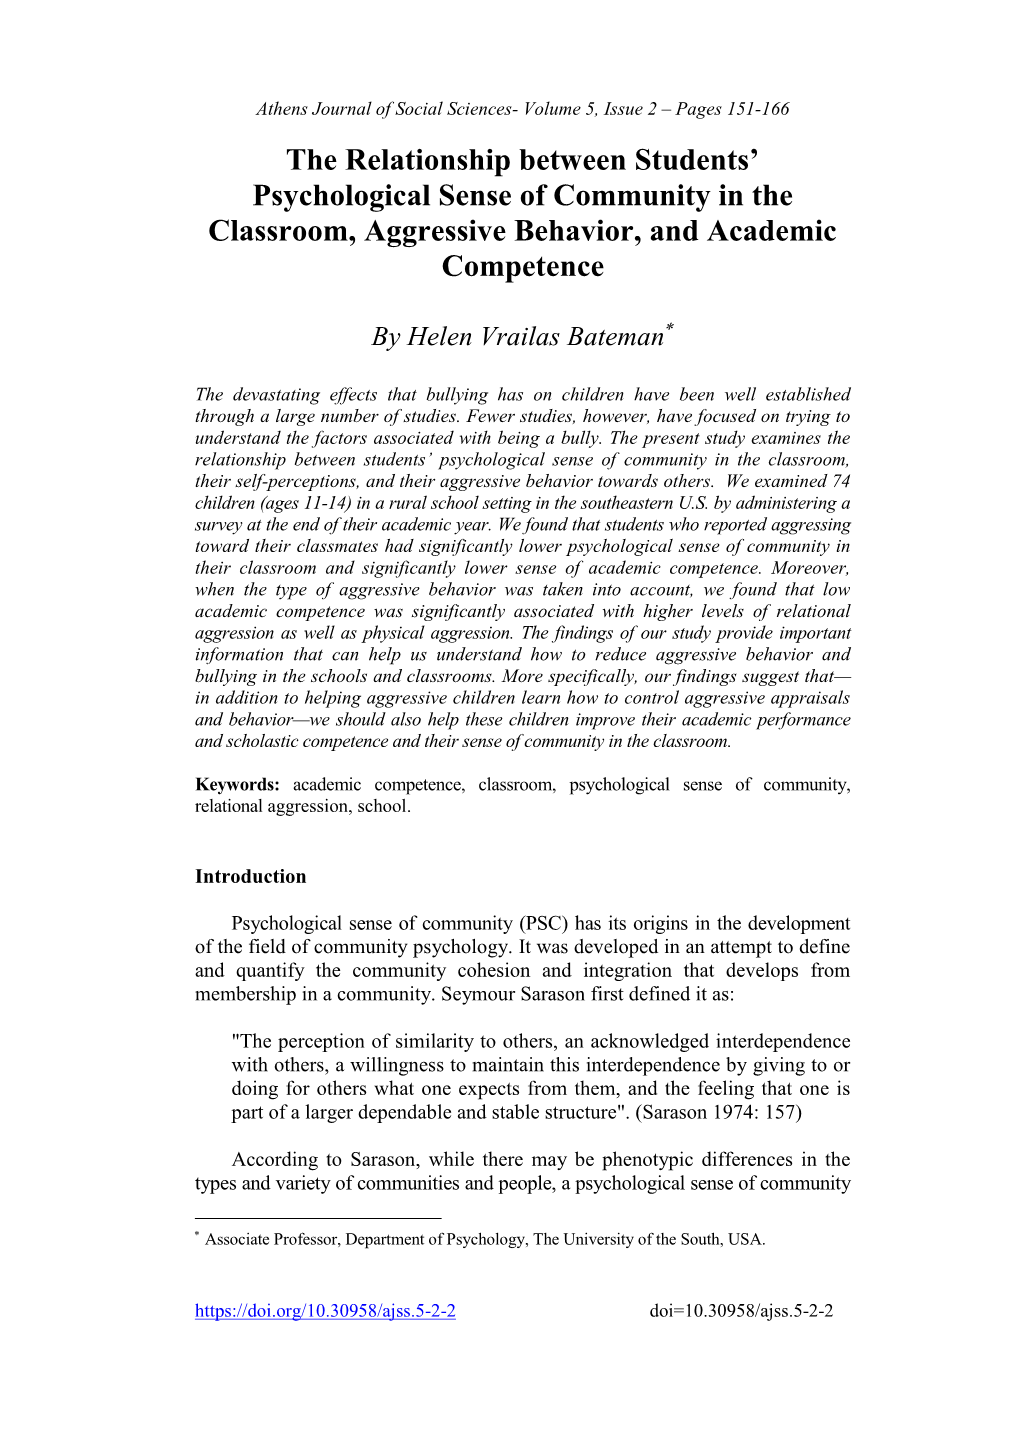 The Relationship Between Students' Psychological Sense of Community in the Classroom, Aggressive Behavior, and Academic Compet